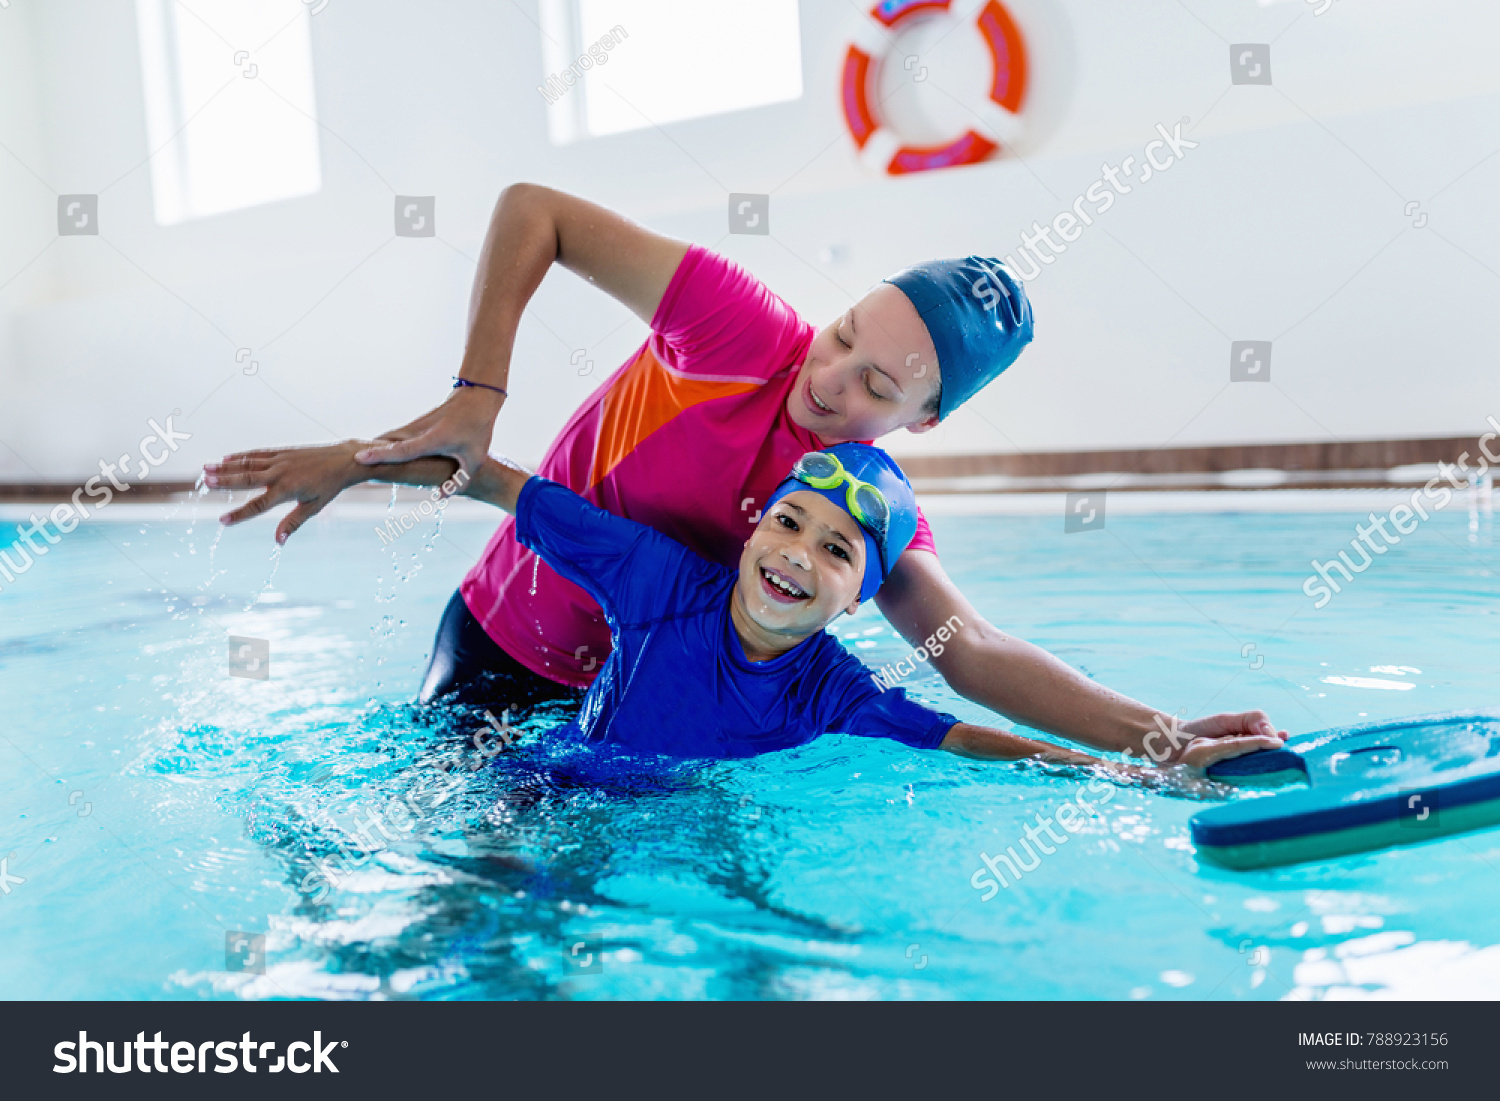 Boy having a swimming lesson with instructor #788923156